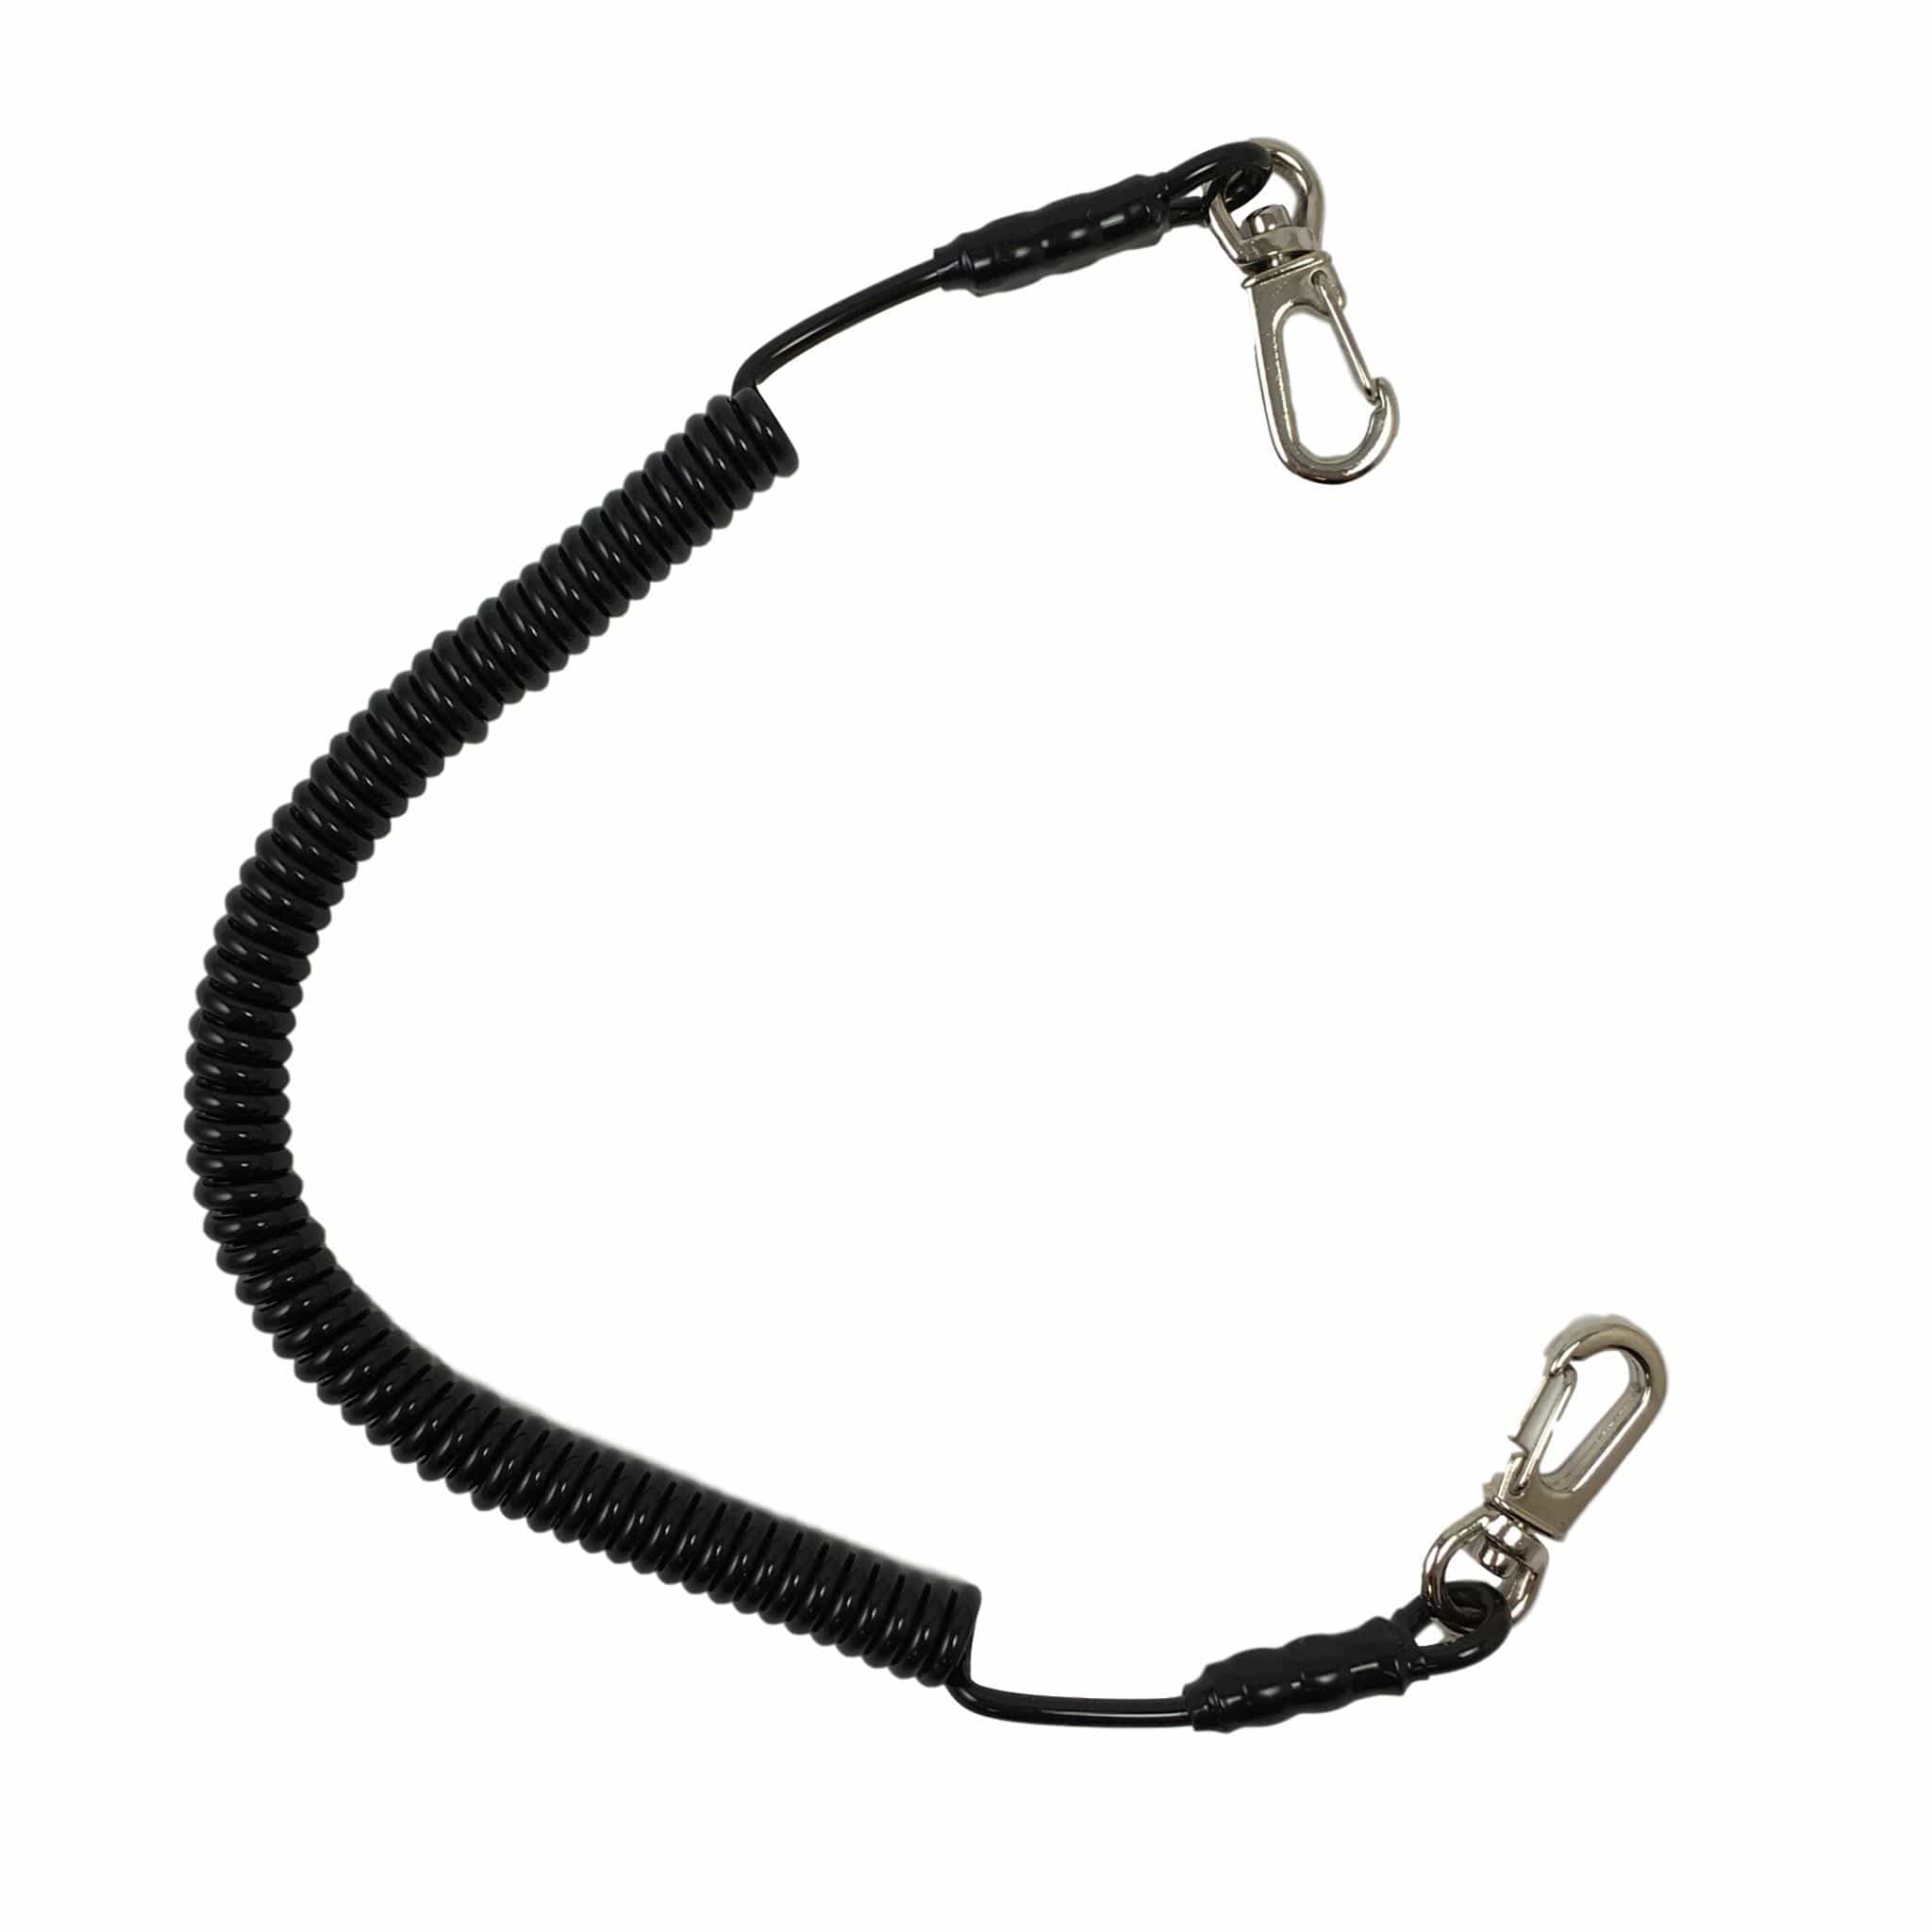 Van Staal Safety Lanyard - The Saltwater Edge